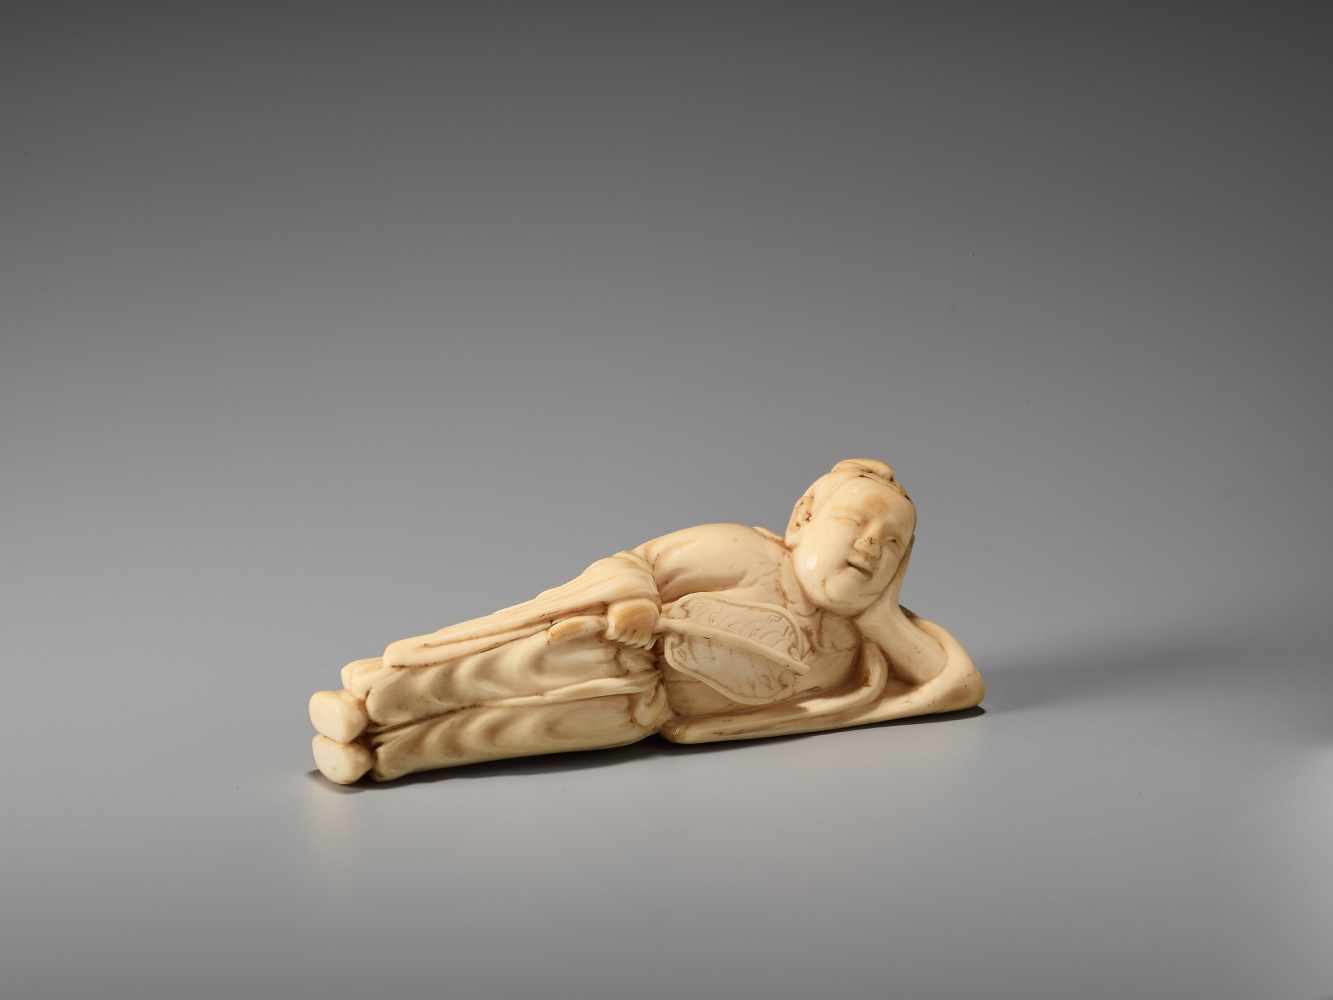 AN IVORY NETSUKE OF A RECLINING CHINESE IMMORTAL WITH A FANUnsigned, ivory netsukeJapan, late 18th - Image 4 of 6